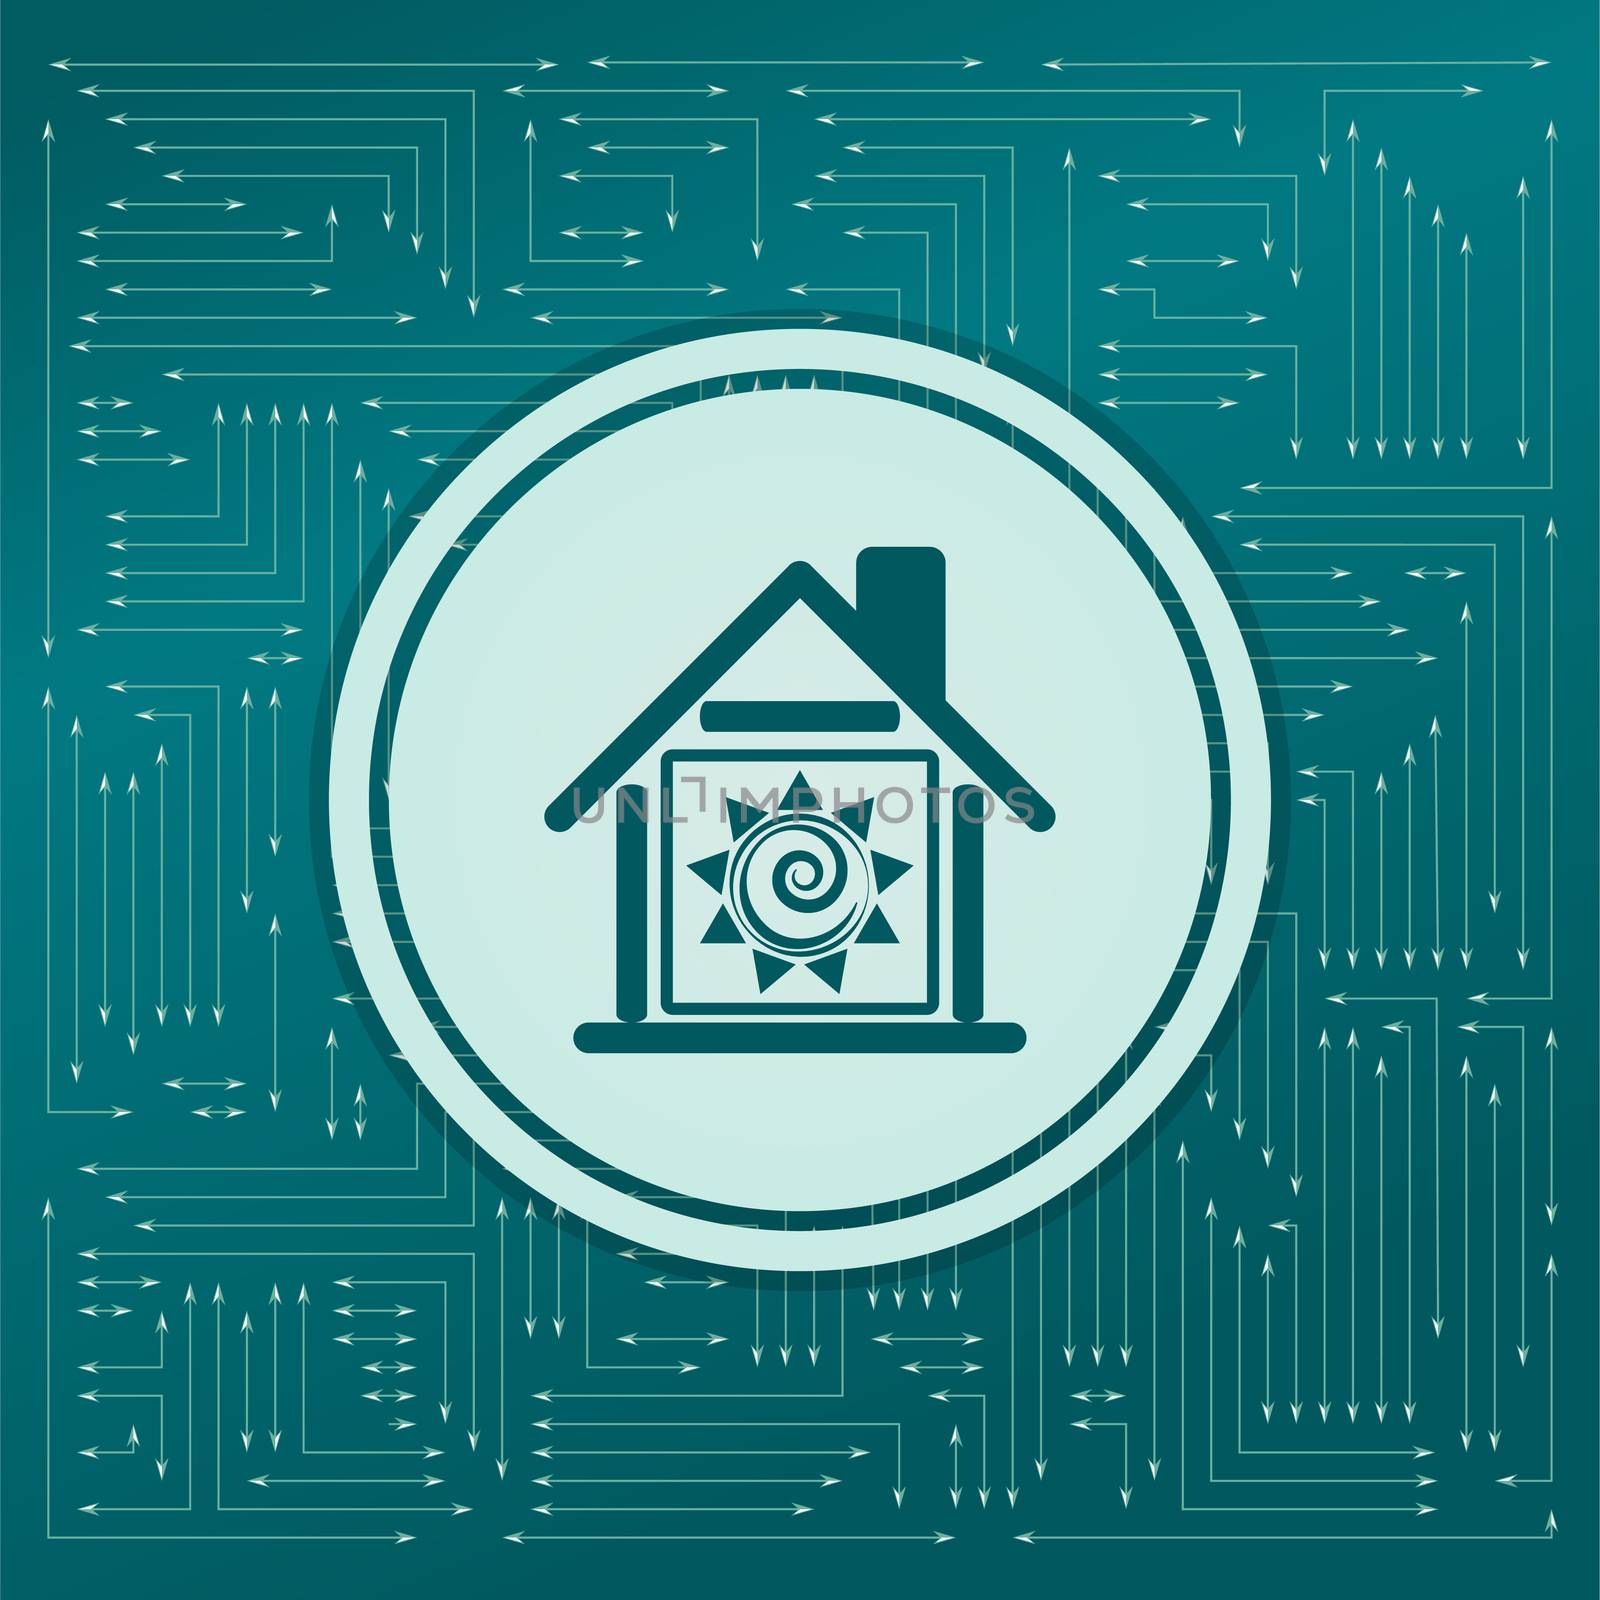 warm Home icon on a green background, with arrows in different directions. It appears on the electronic board. illustration